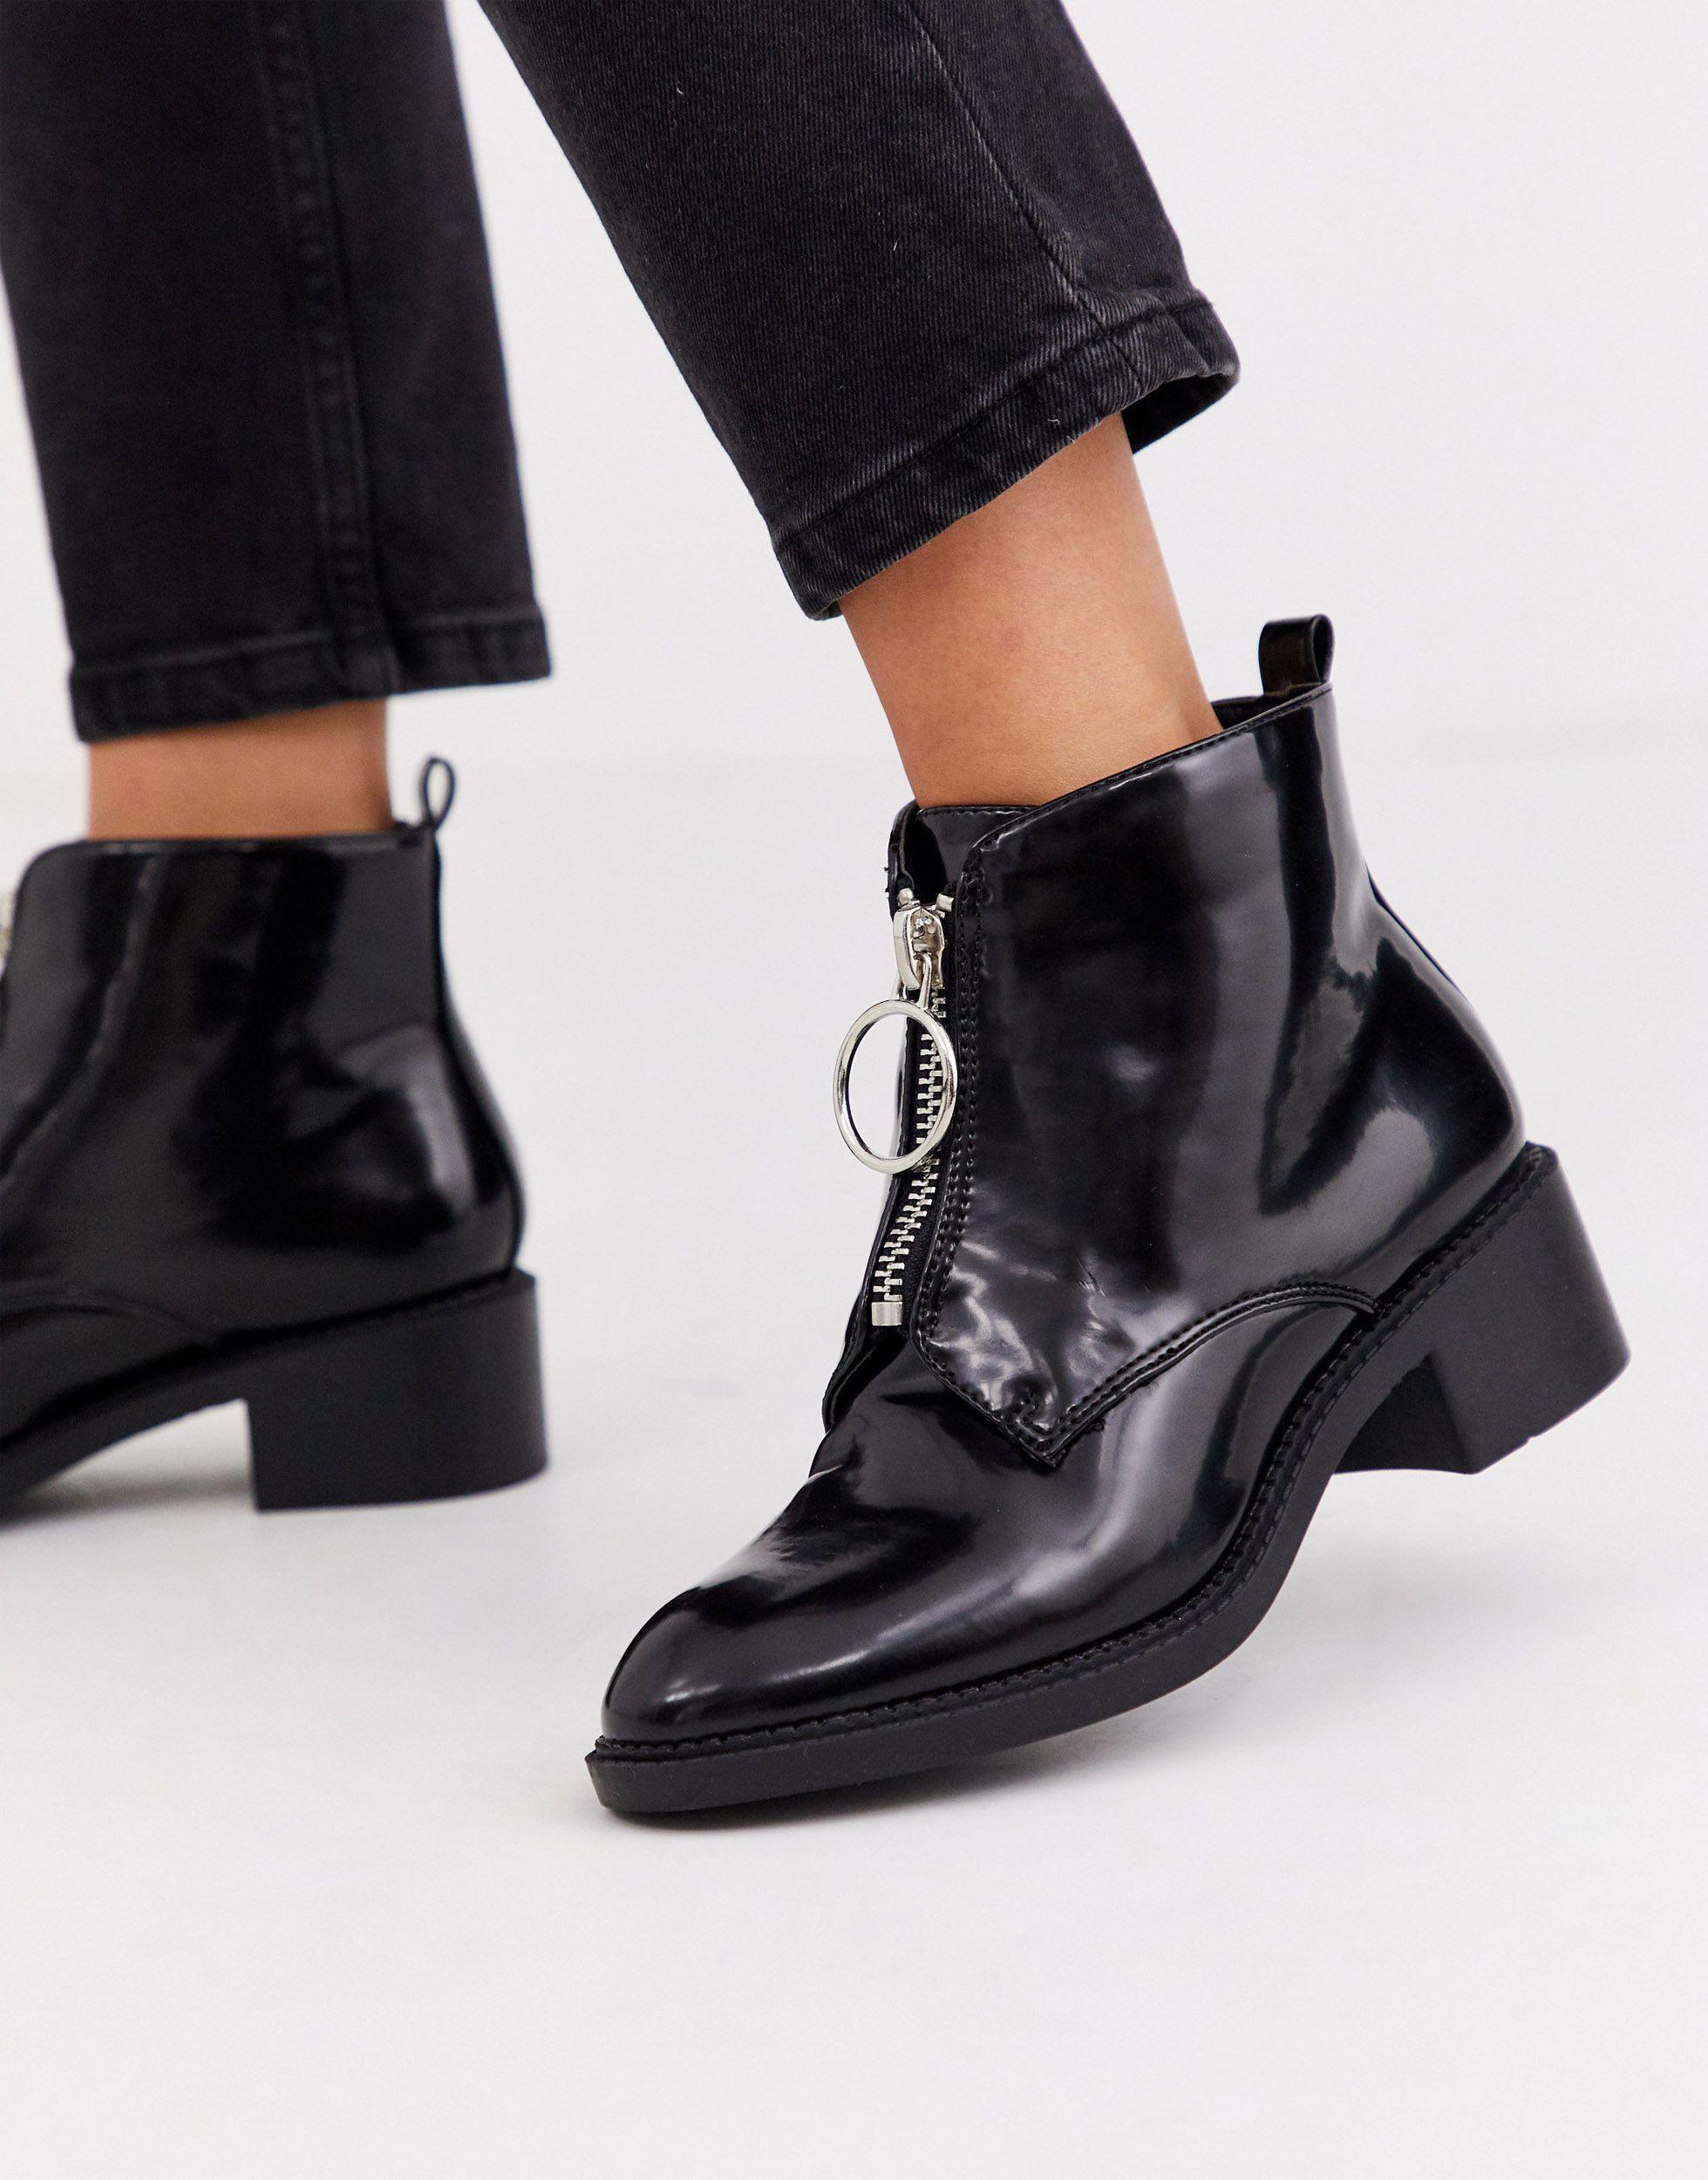 black patent boots with zip up front